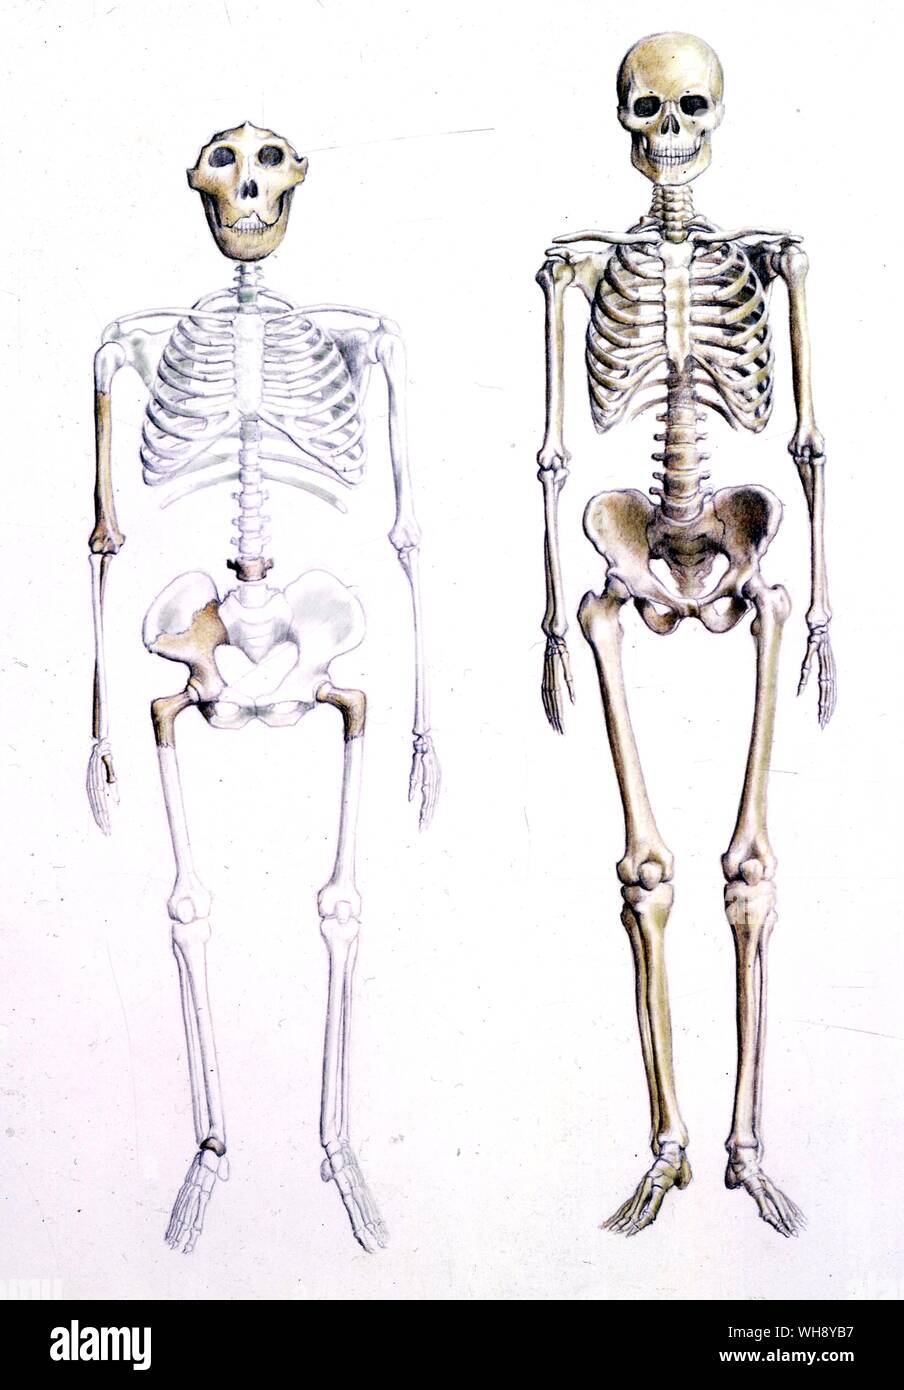 Comparison between skeletons of  Australopithecus Boisei and Homo Sapien. (Search for Australopithecus Africanus for additional comparison) Stock Photo